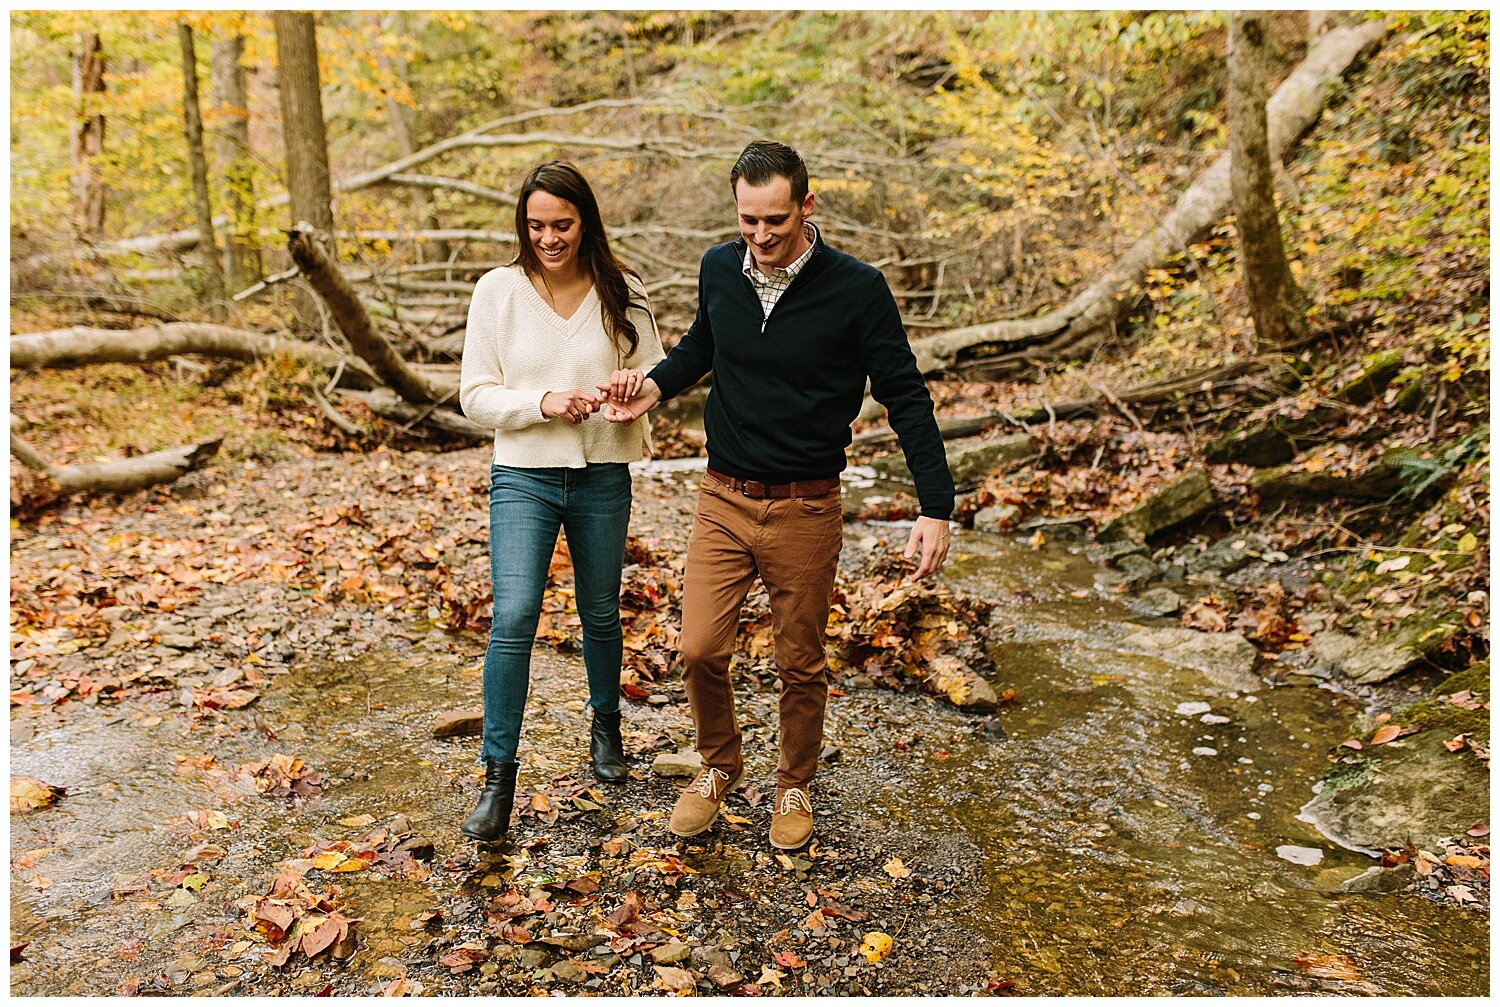 trent.and.kendra.photography.bernheim.engagement.session-11.jpg